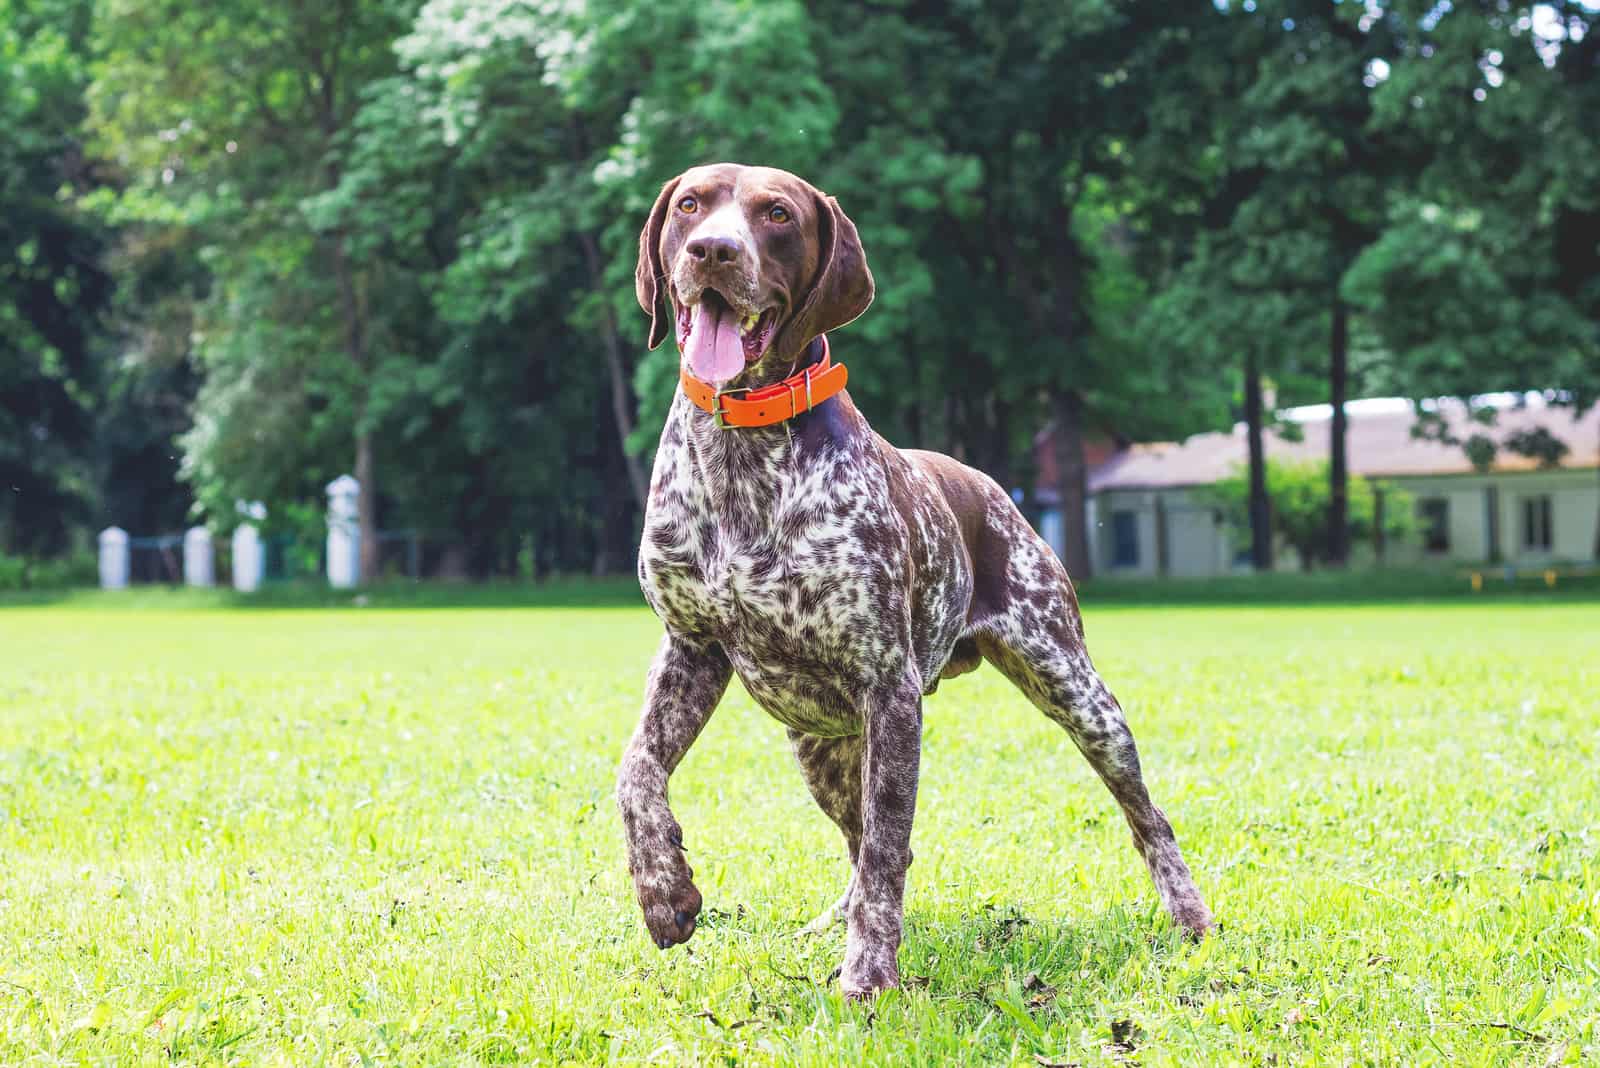 The German Shorthaired Pointer walks the field